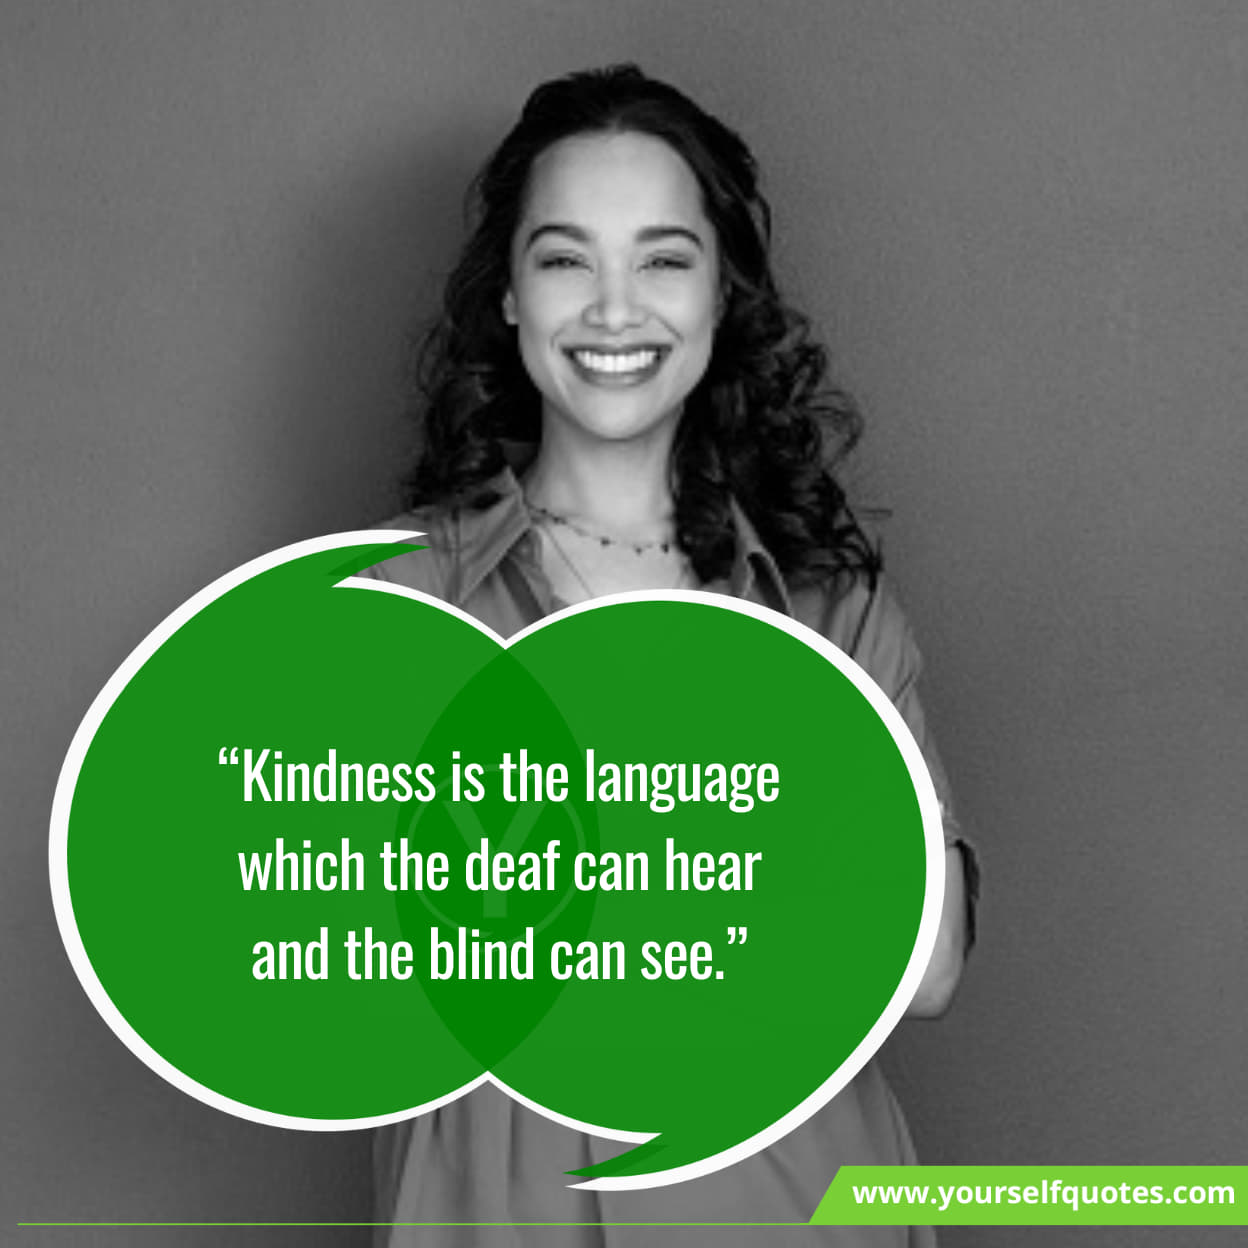 Best Inspirational Short Kindness Quotes 